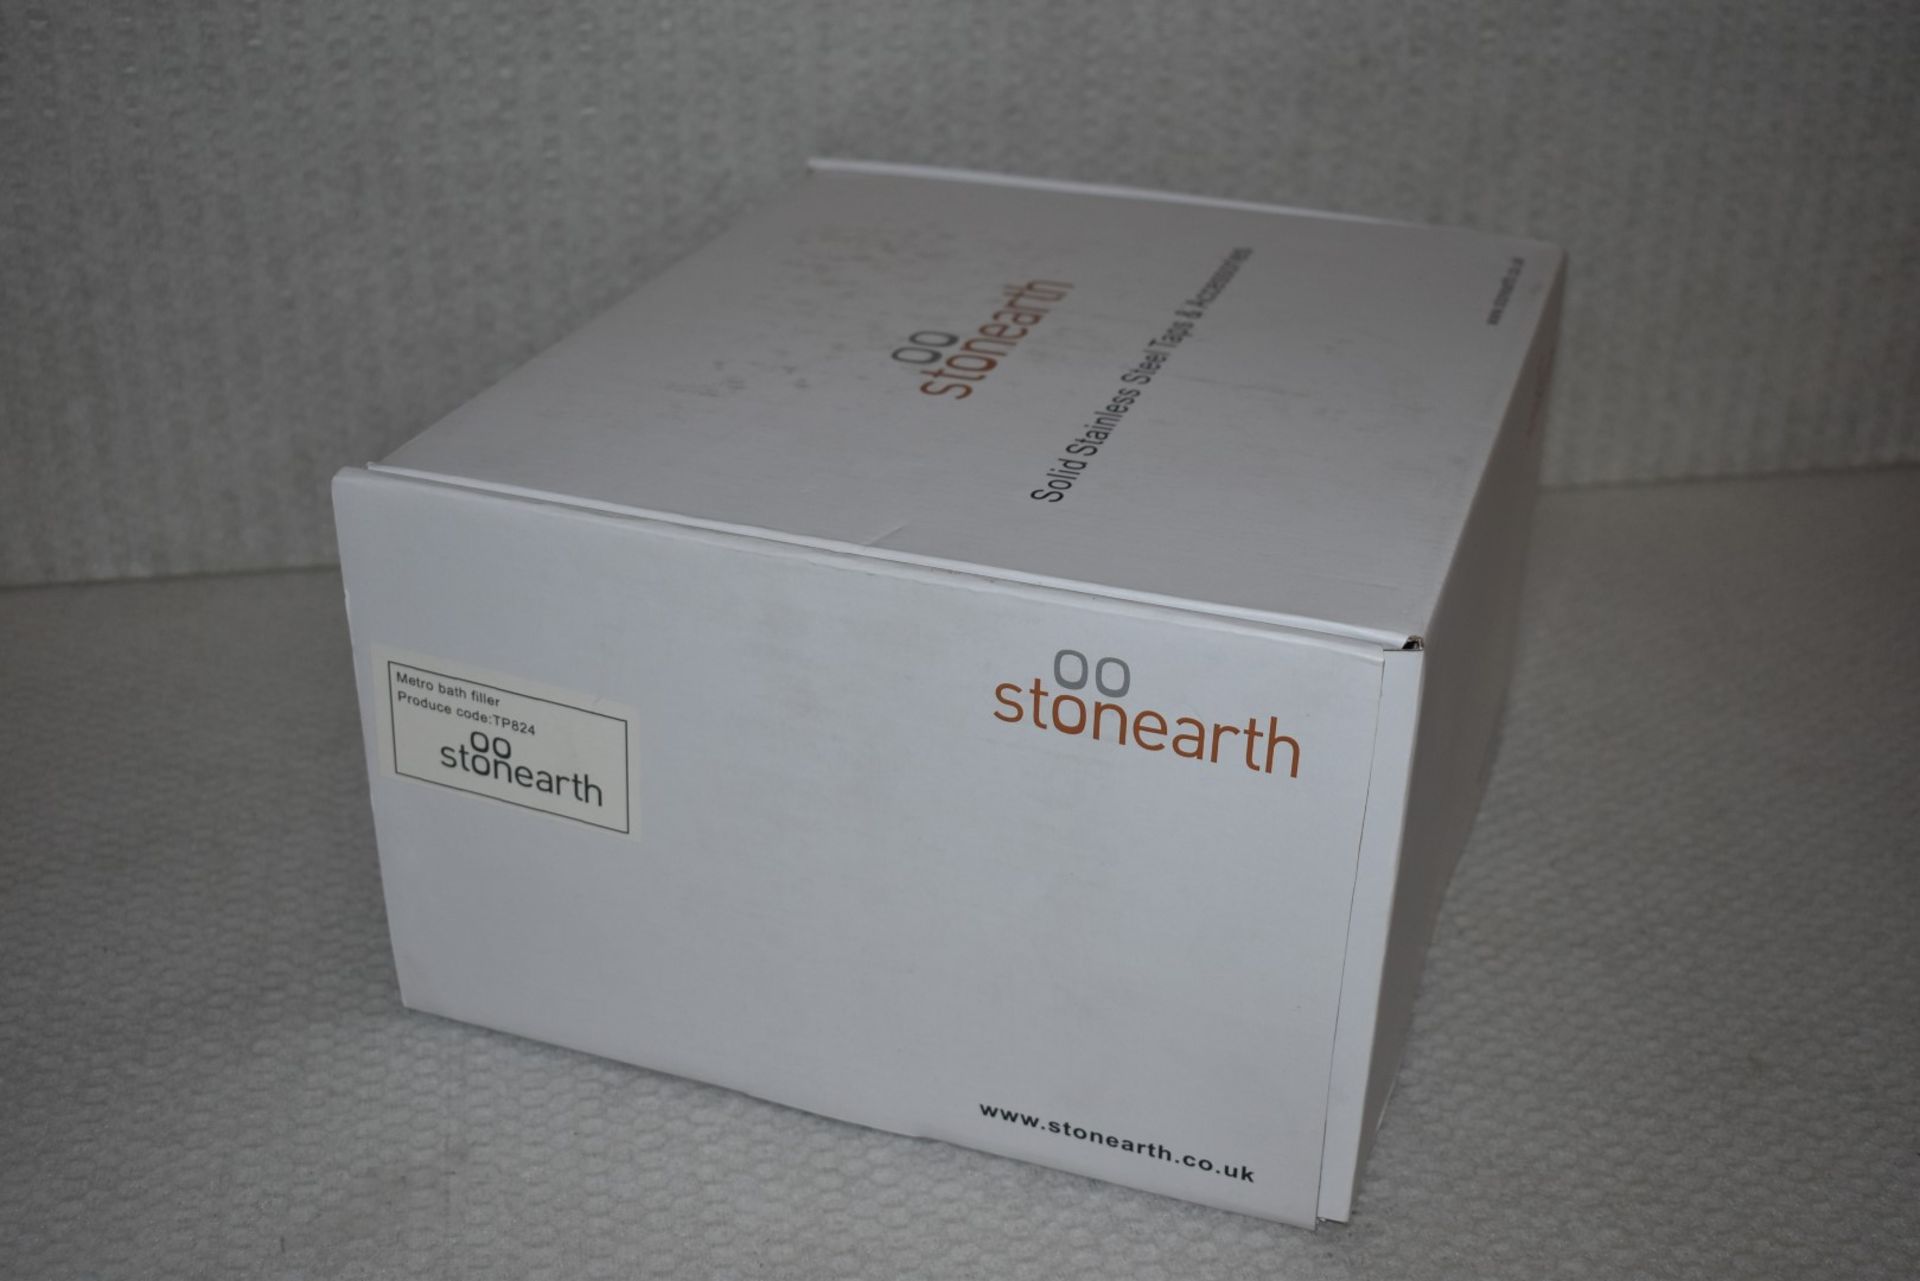 1 x Stonearth 'Metro' Stainless Steel Bath Filler Mixer Tap - Brand New & Boxed - RRP £340 - Ref: - Image 13 of 15